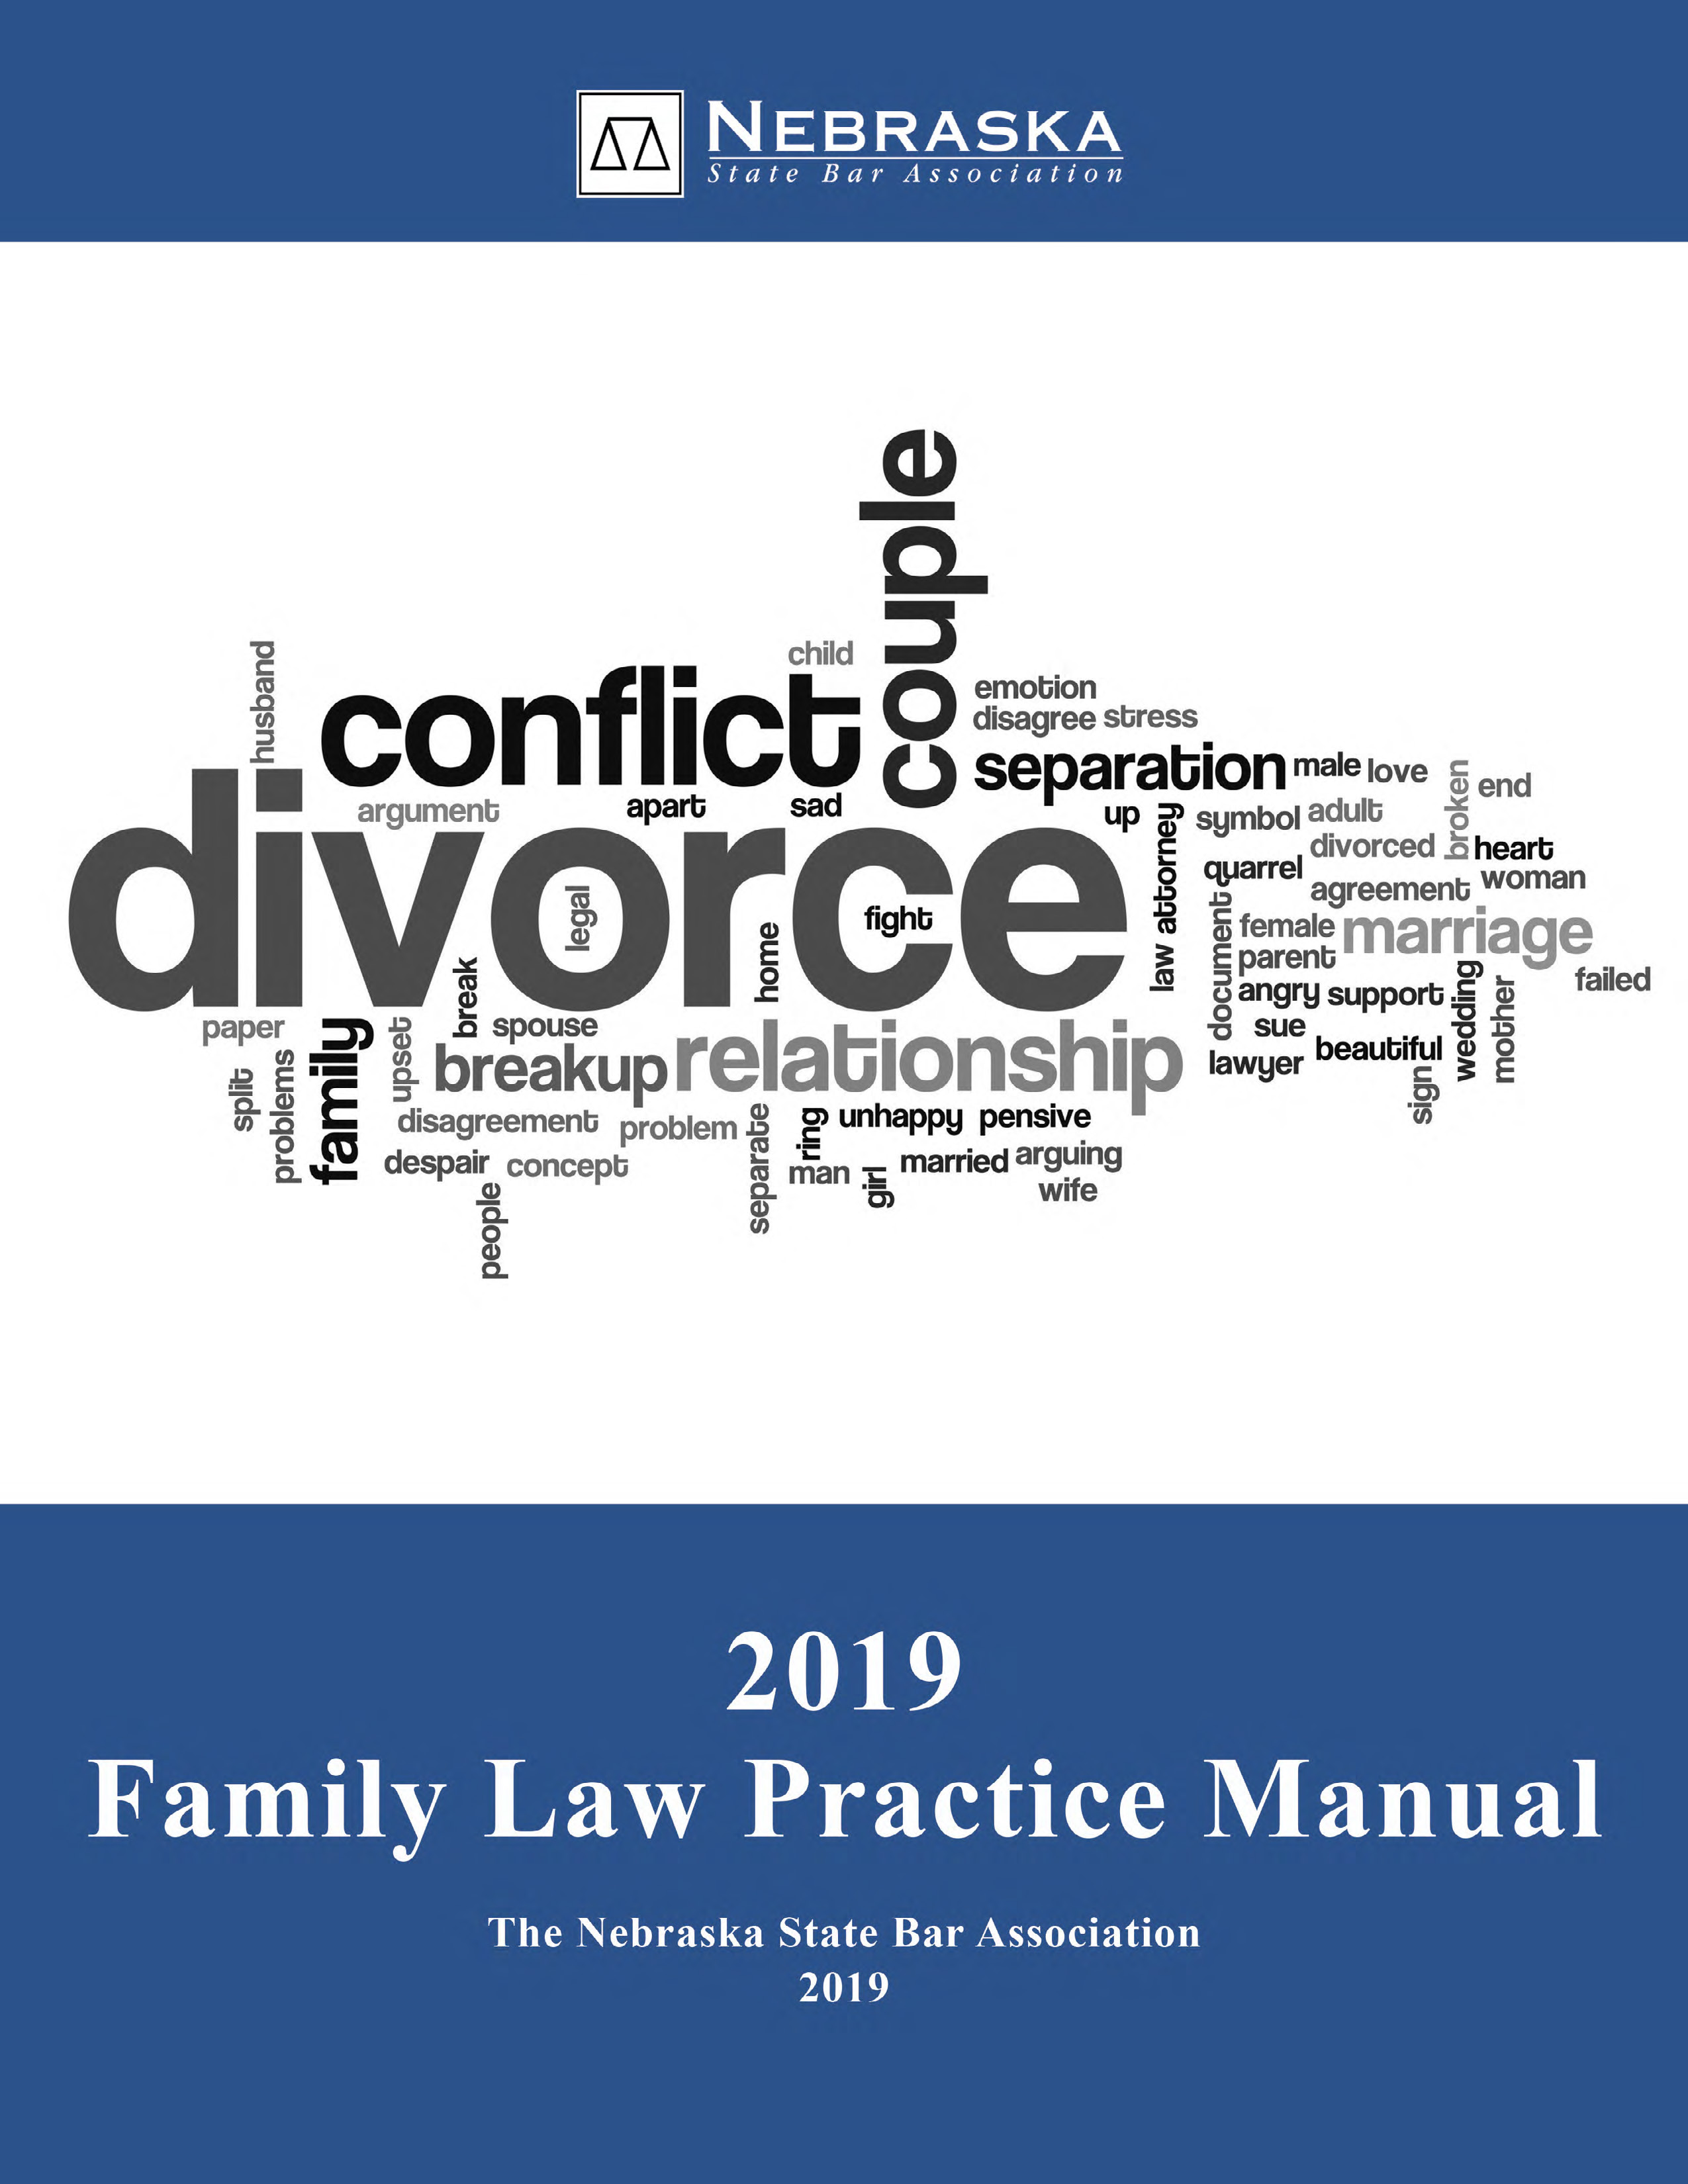 Family Law Practice Manual (2019)